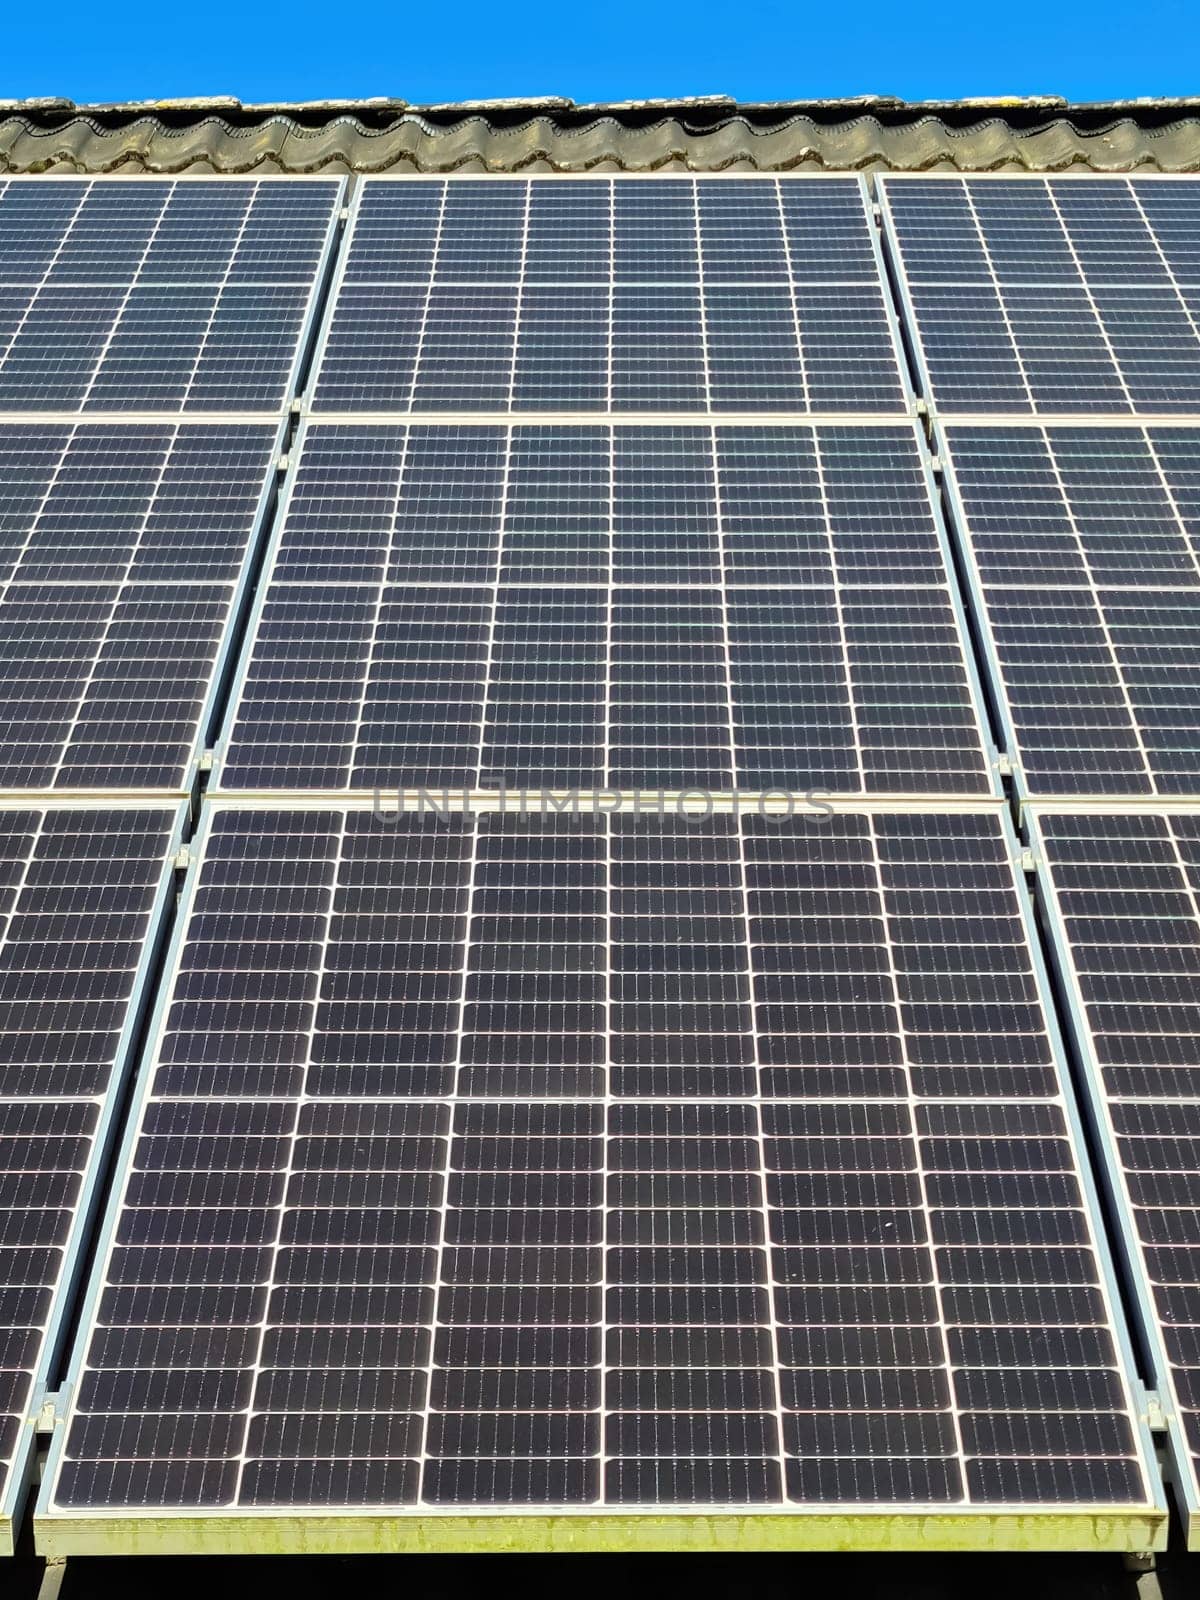 Solar panels producing clean energy on a roof of a residential house by MP_foto71